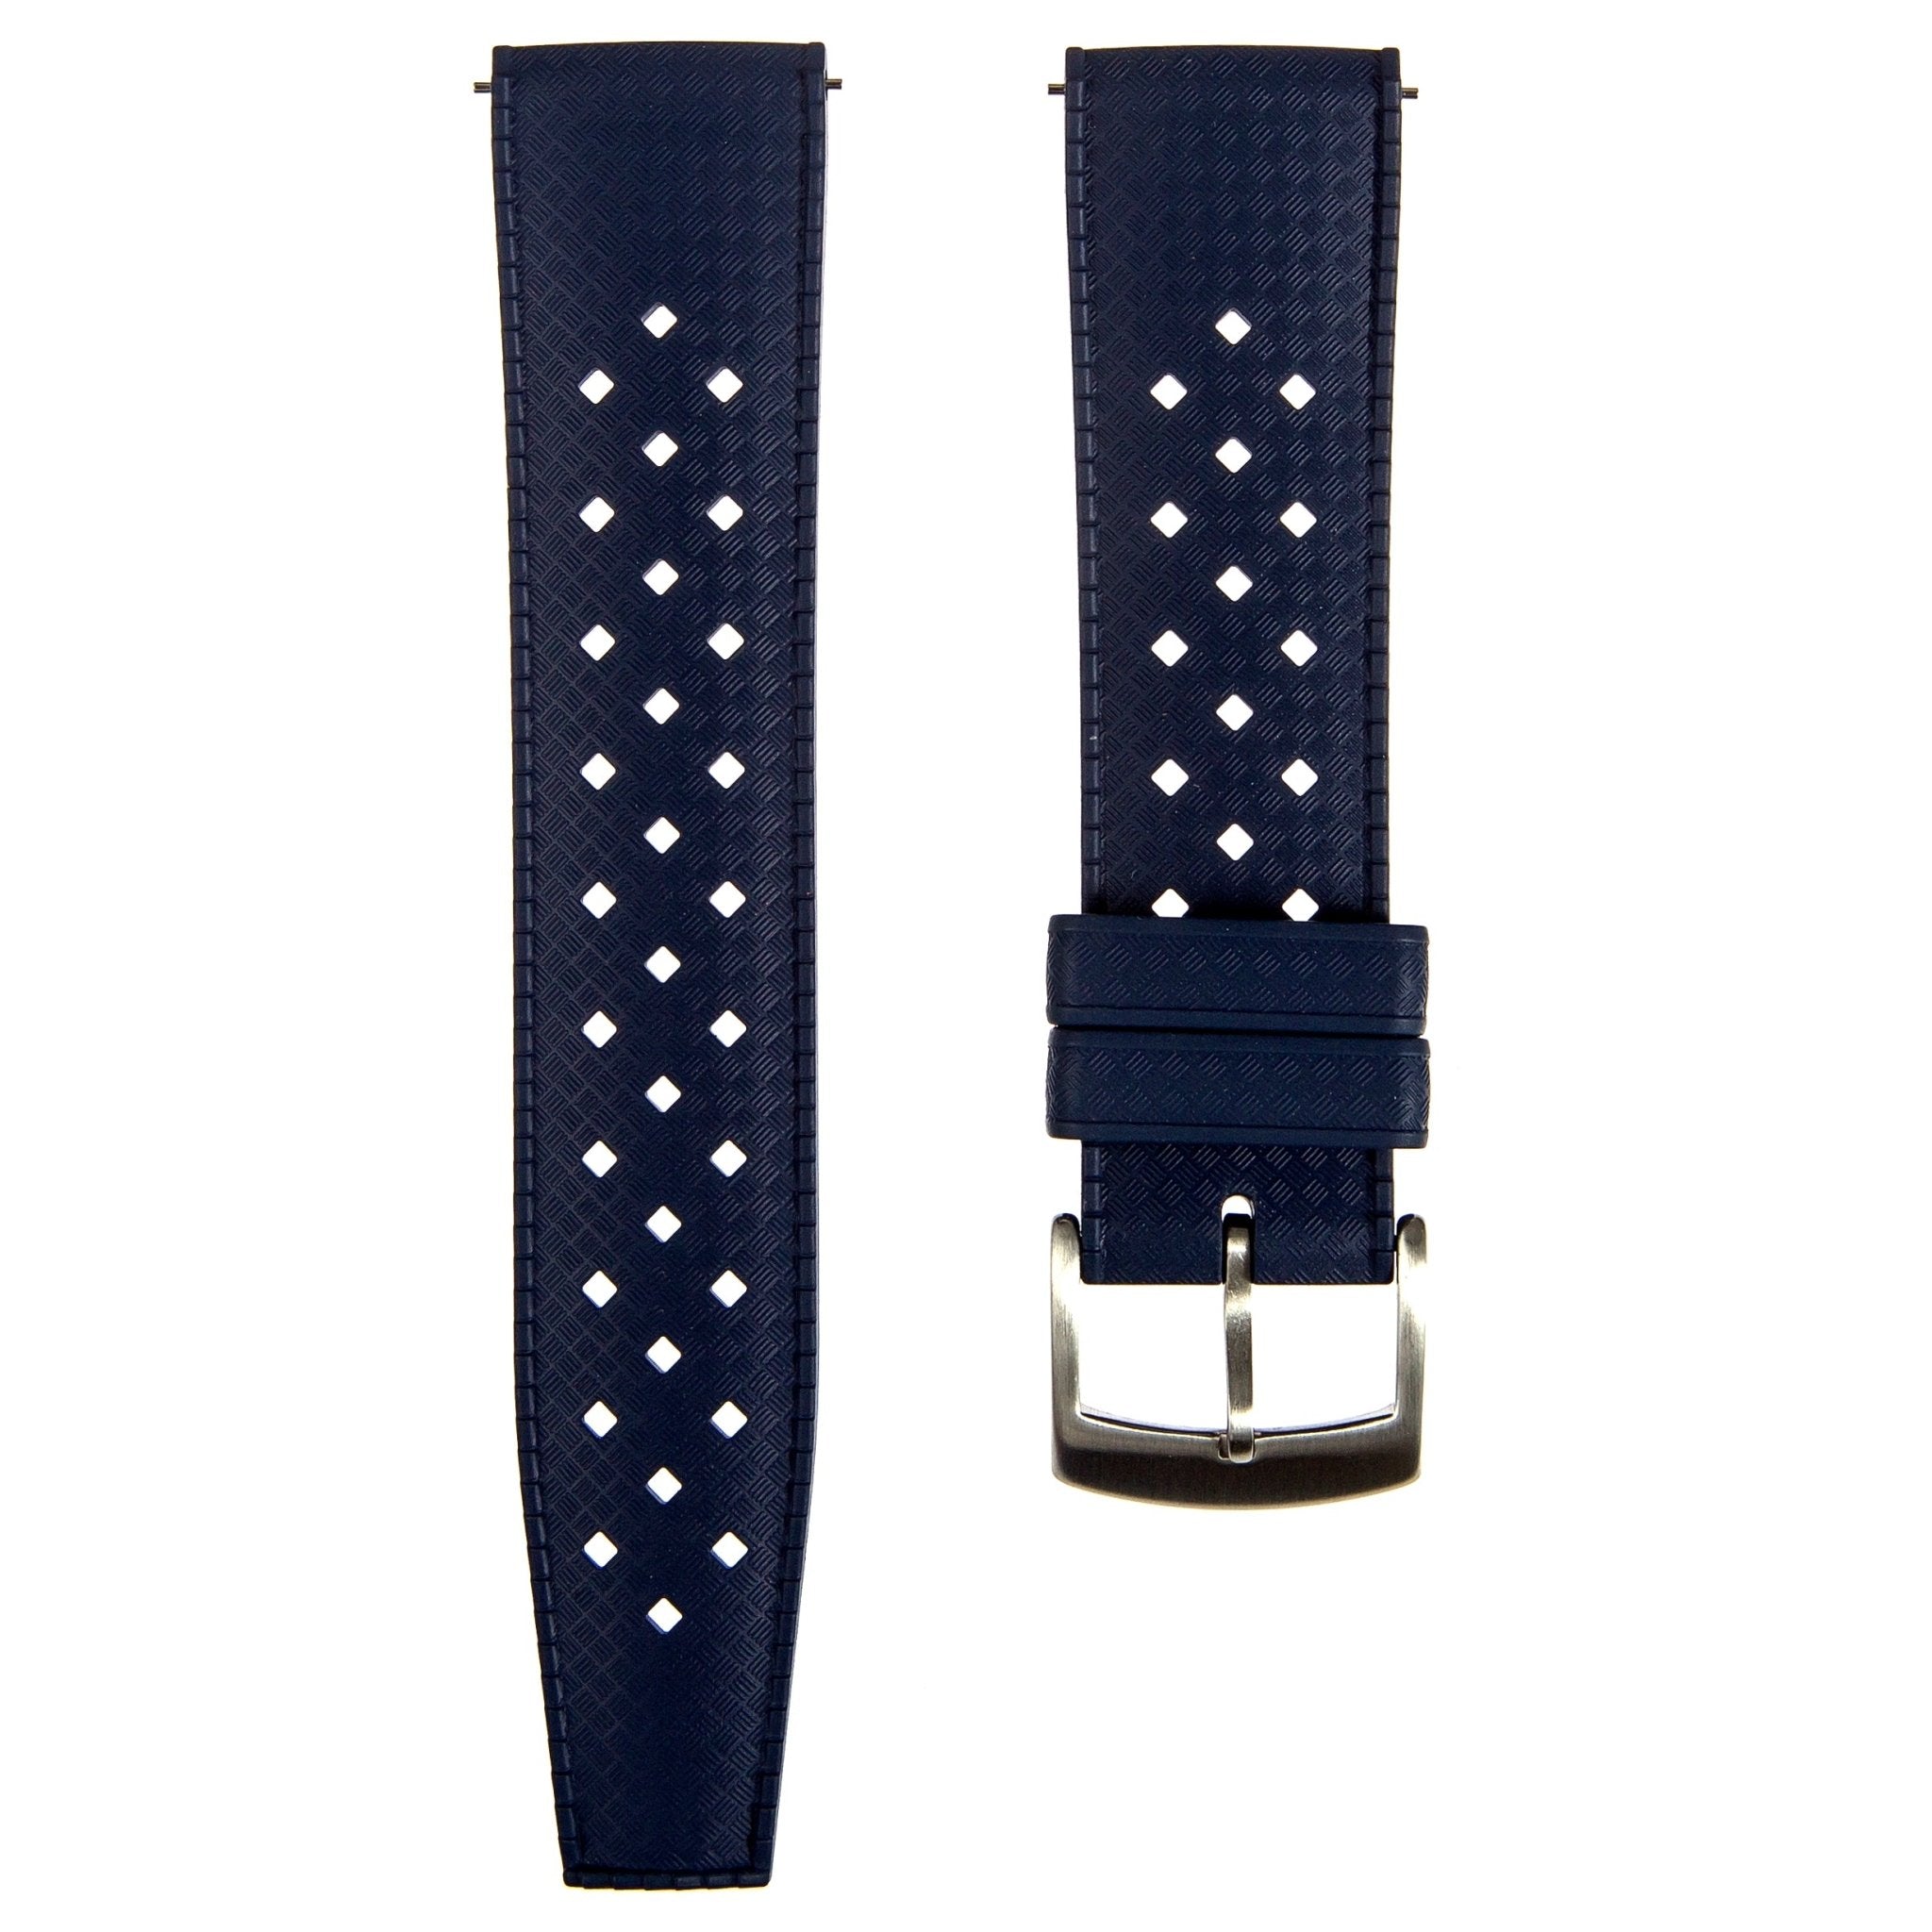 Calypso Tropical Style FKM Rubber Strap - Quick-Release - Navy (2422) -Strapseeker